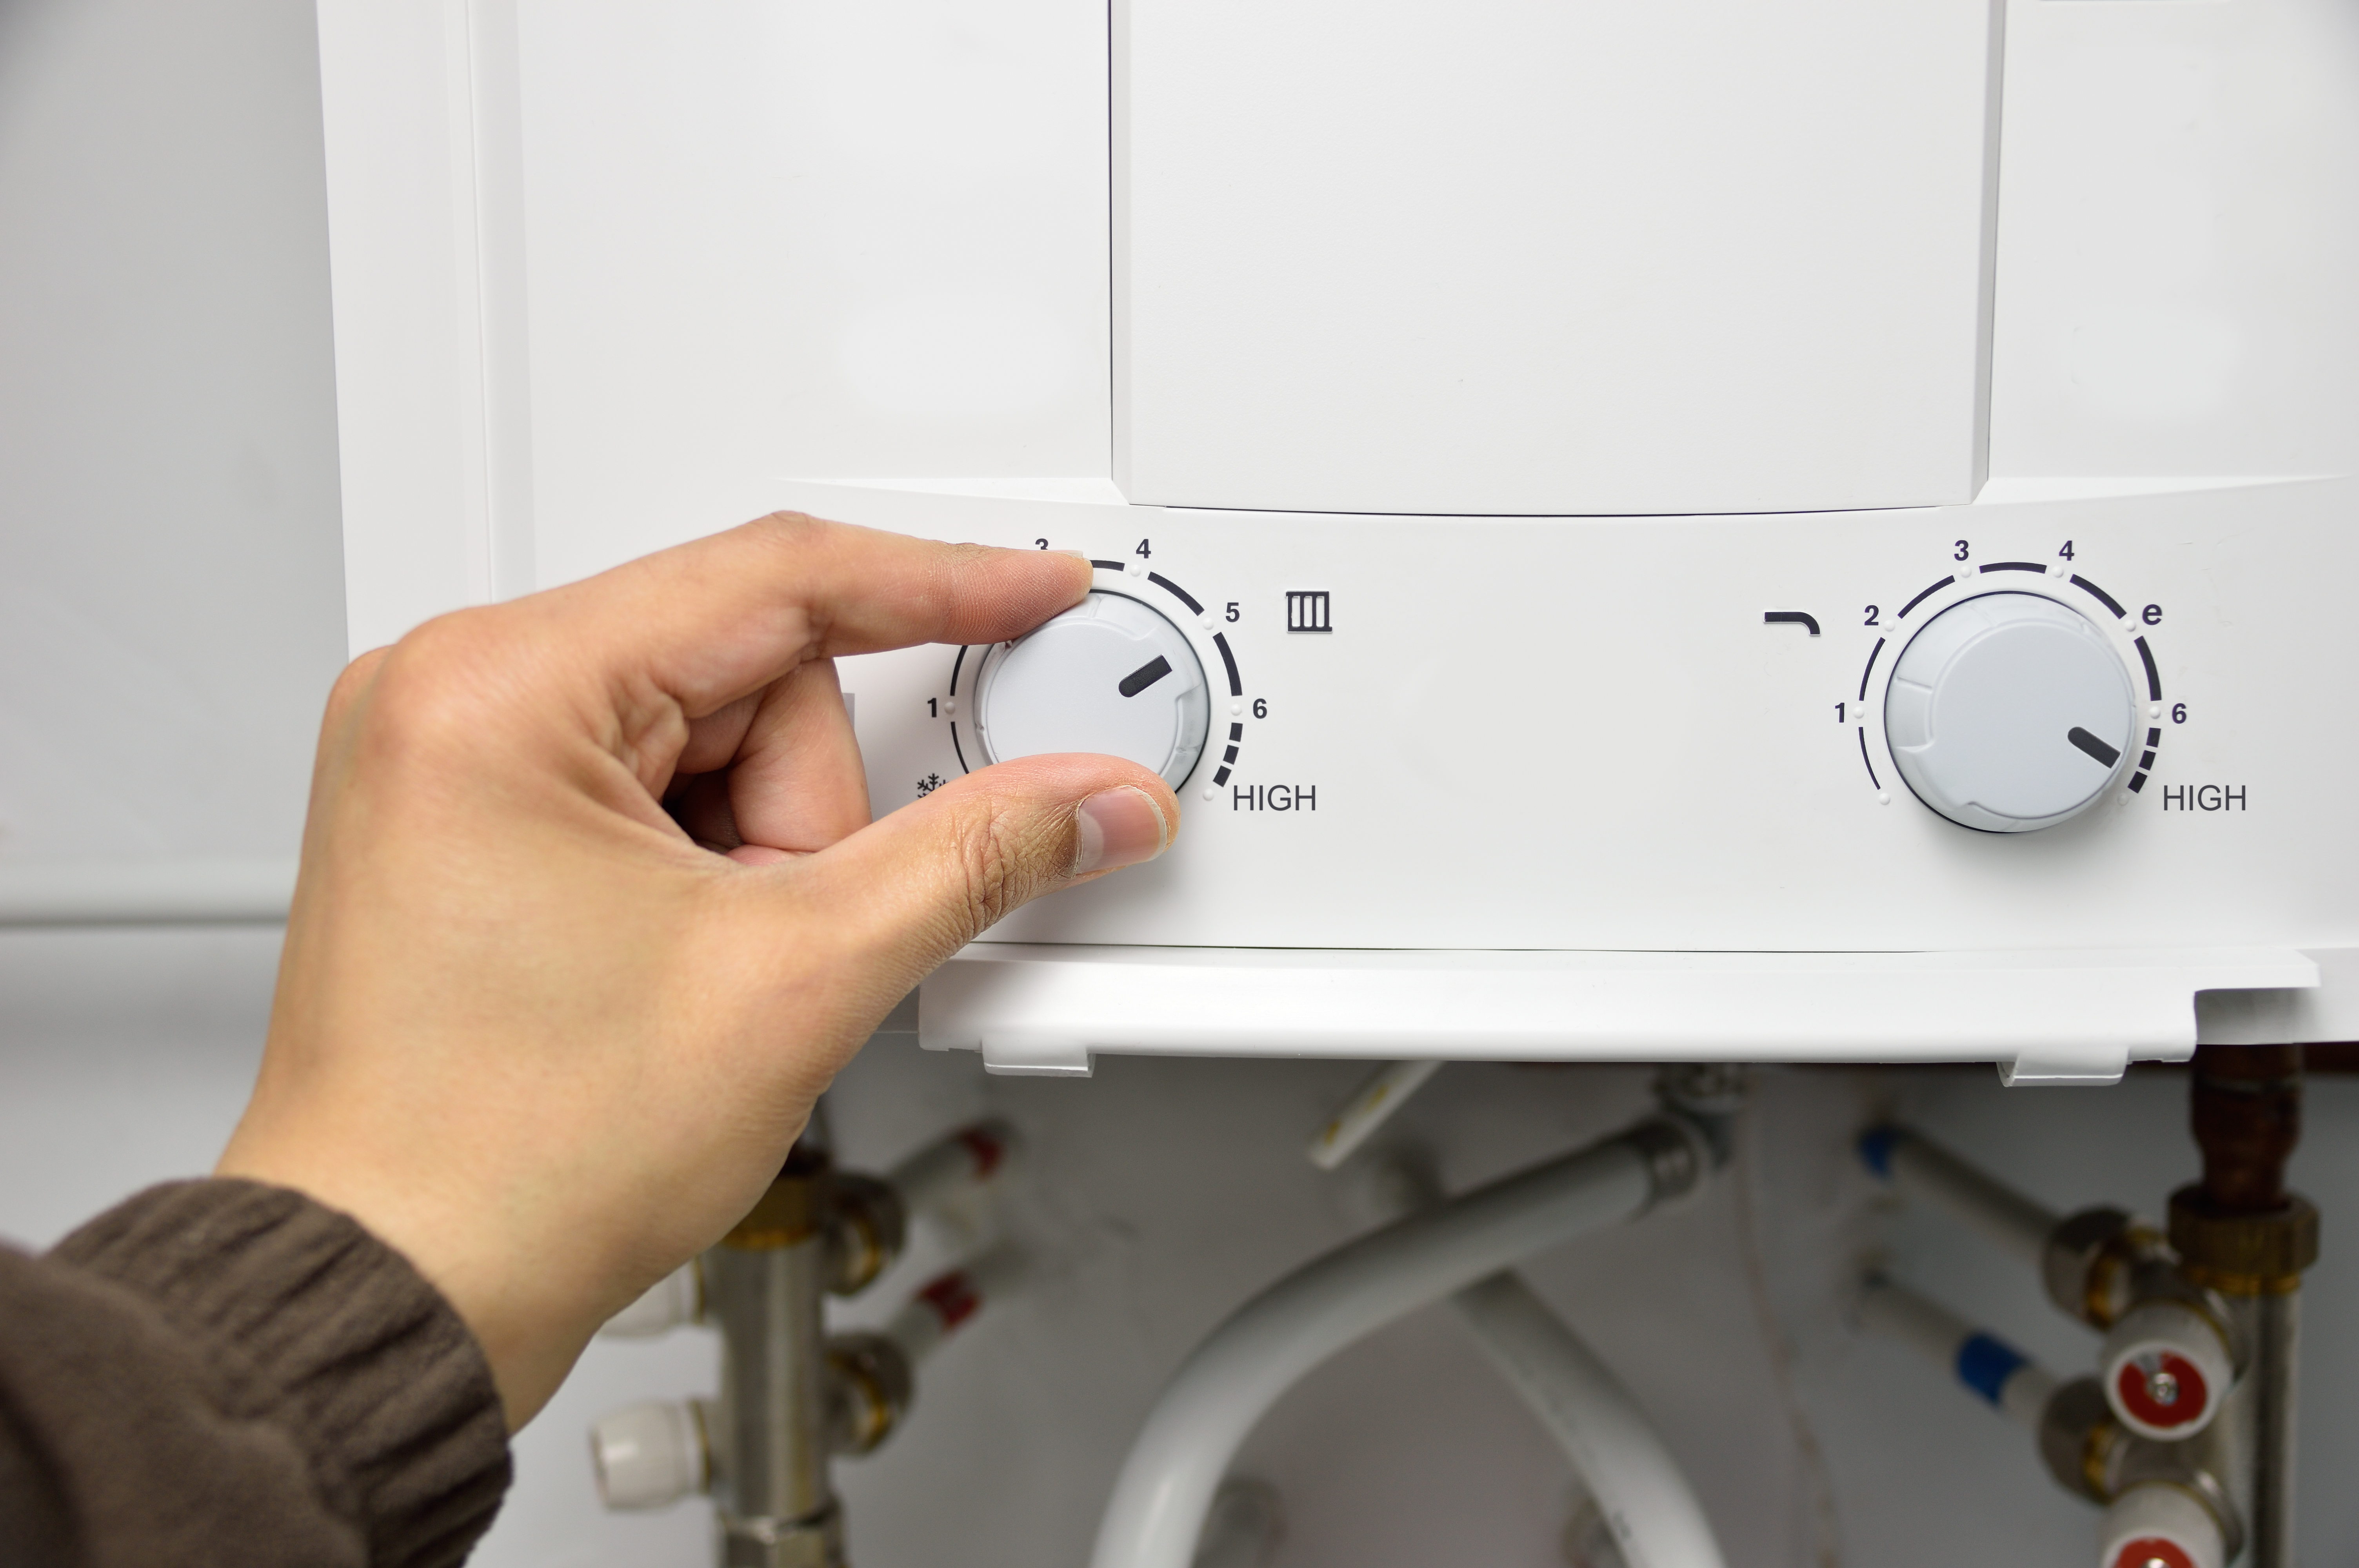 How To Replace The Bottom Heating Element On A Hot Water Heater